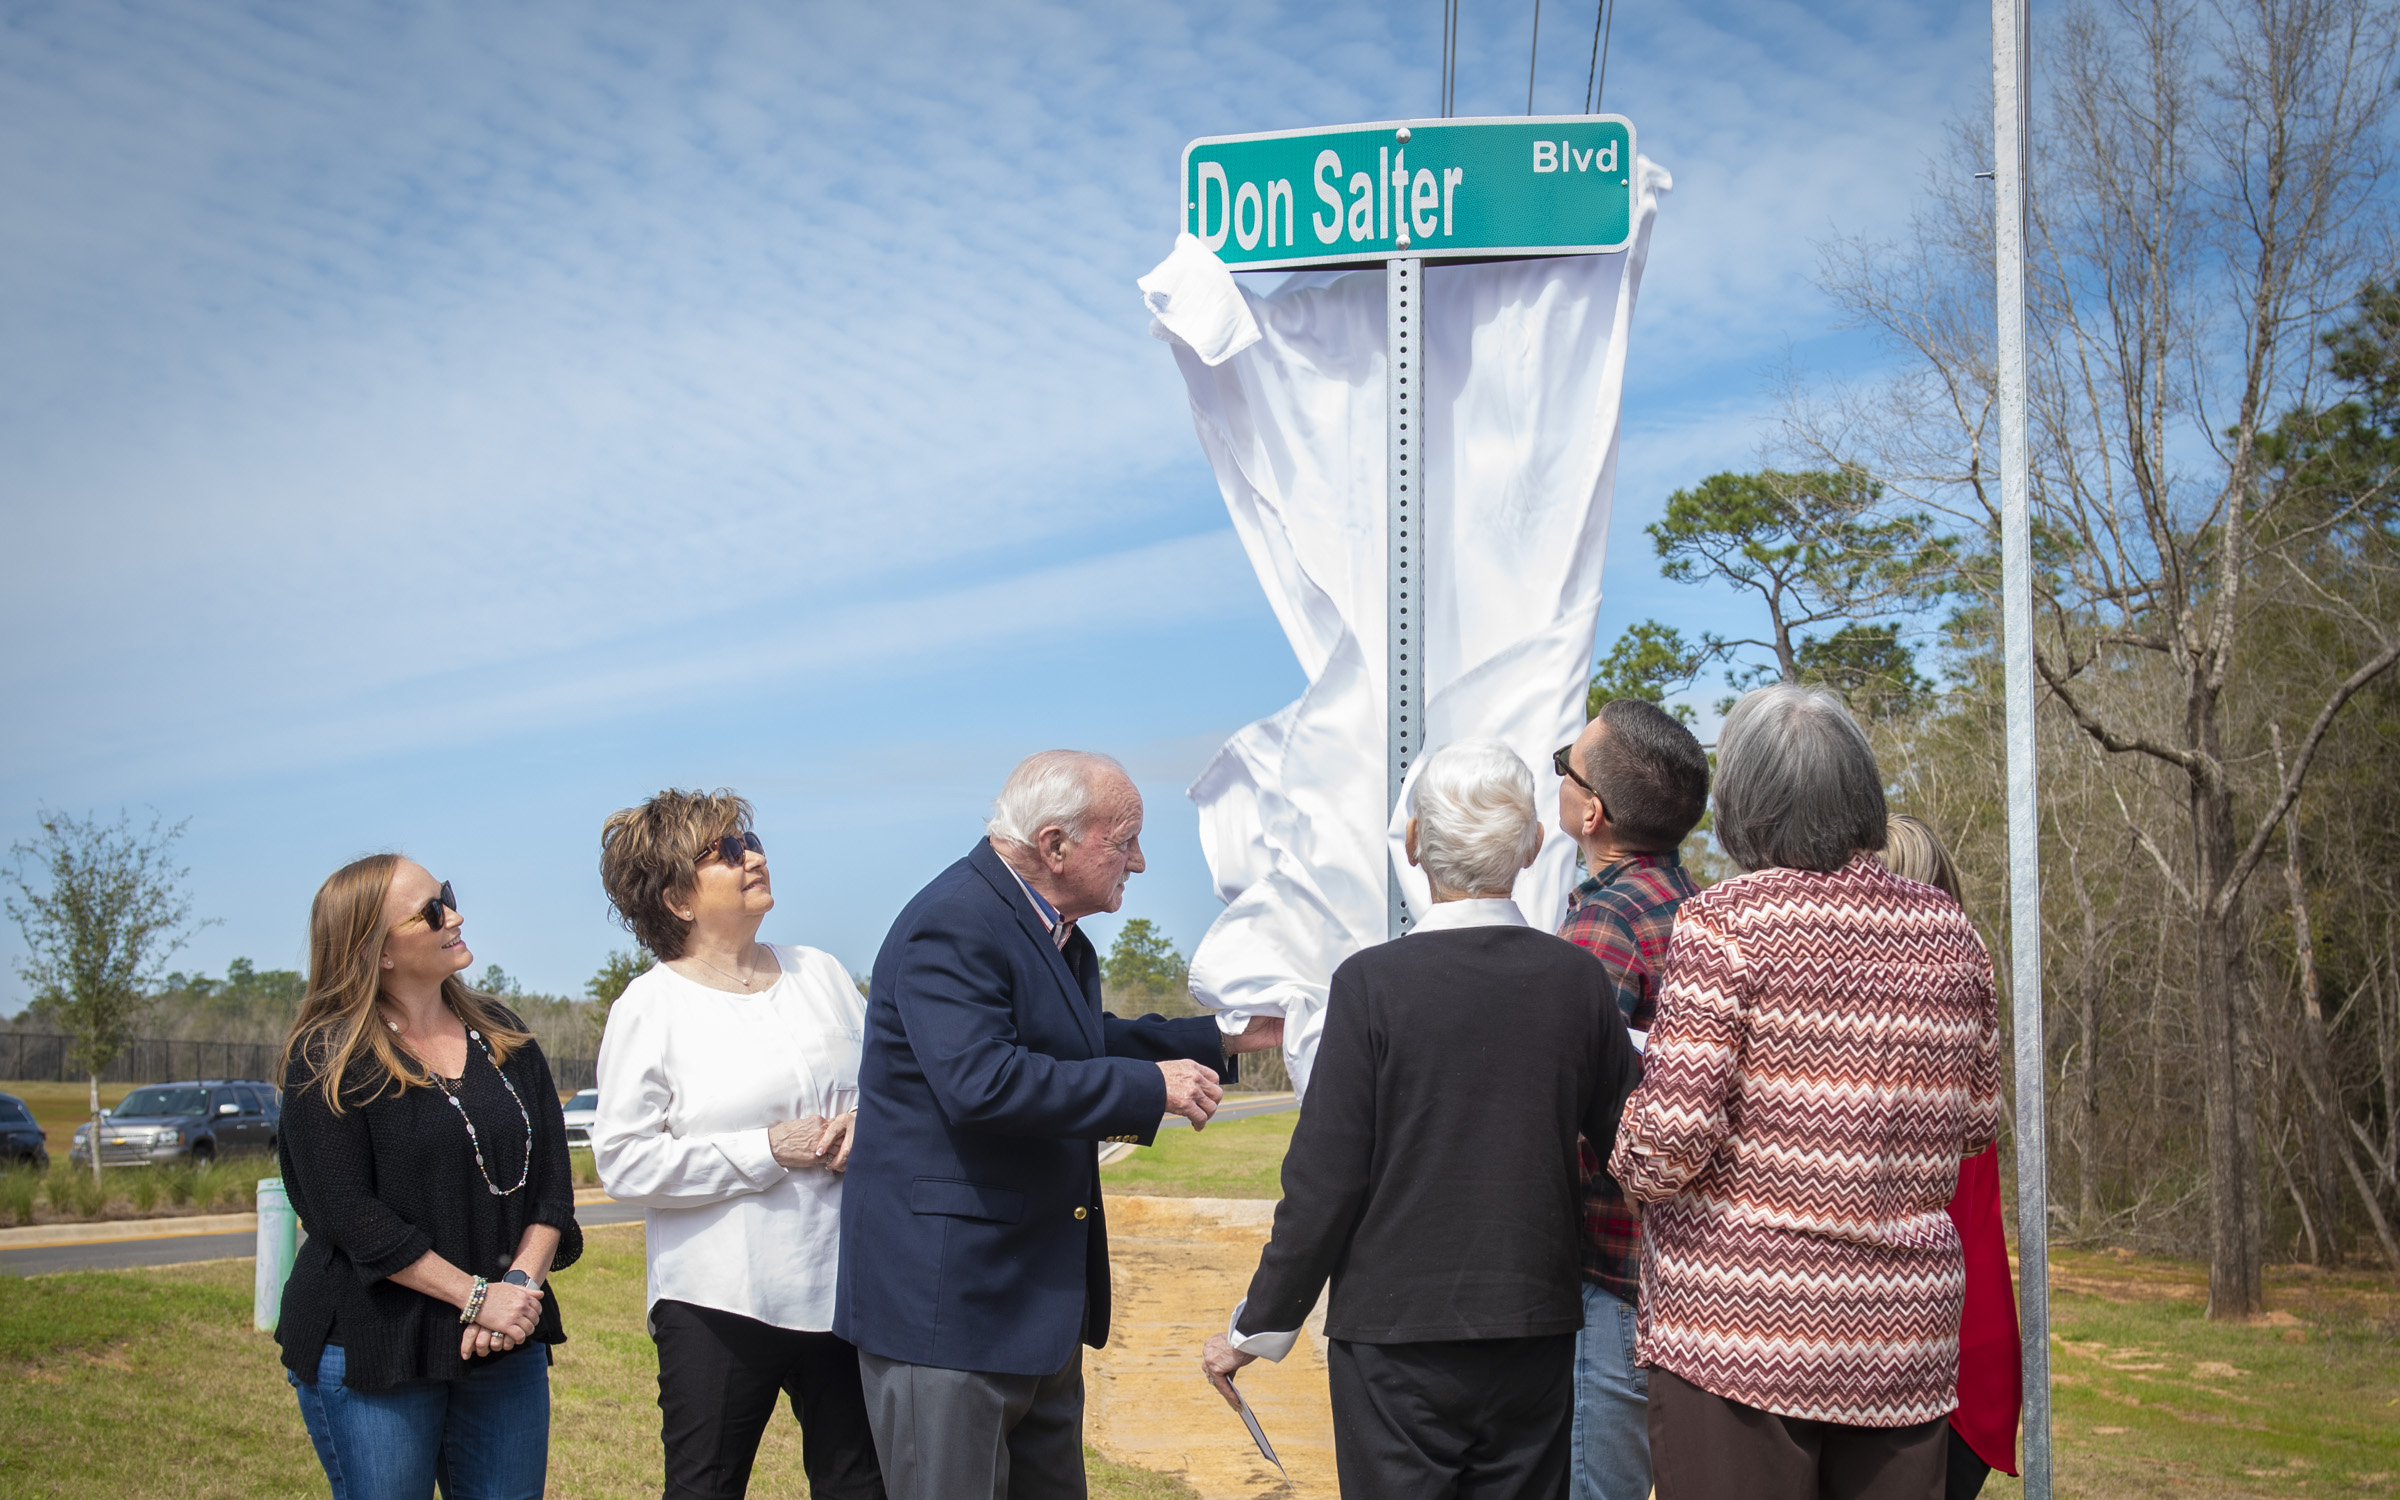 Don Salter and his family unveil the Don Salter Boulevard street sign